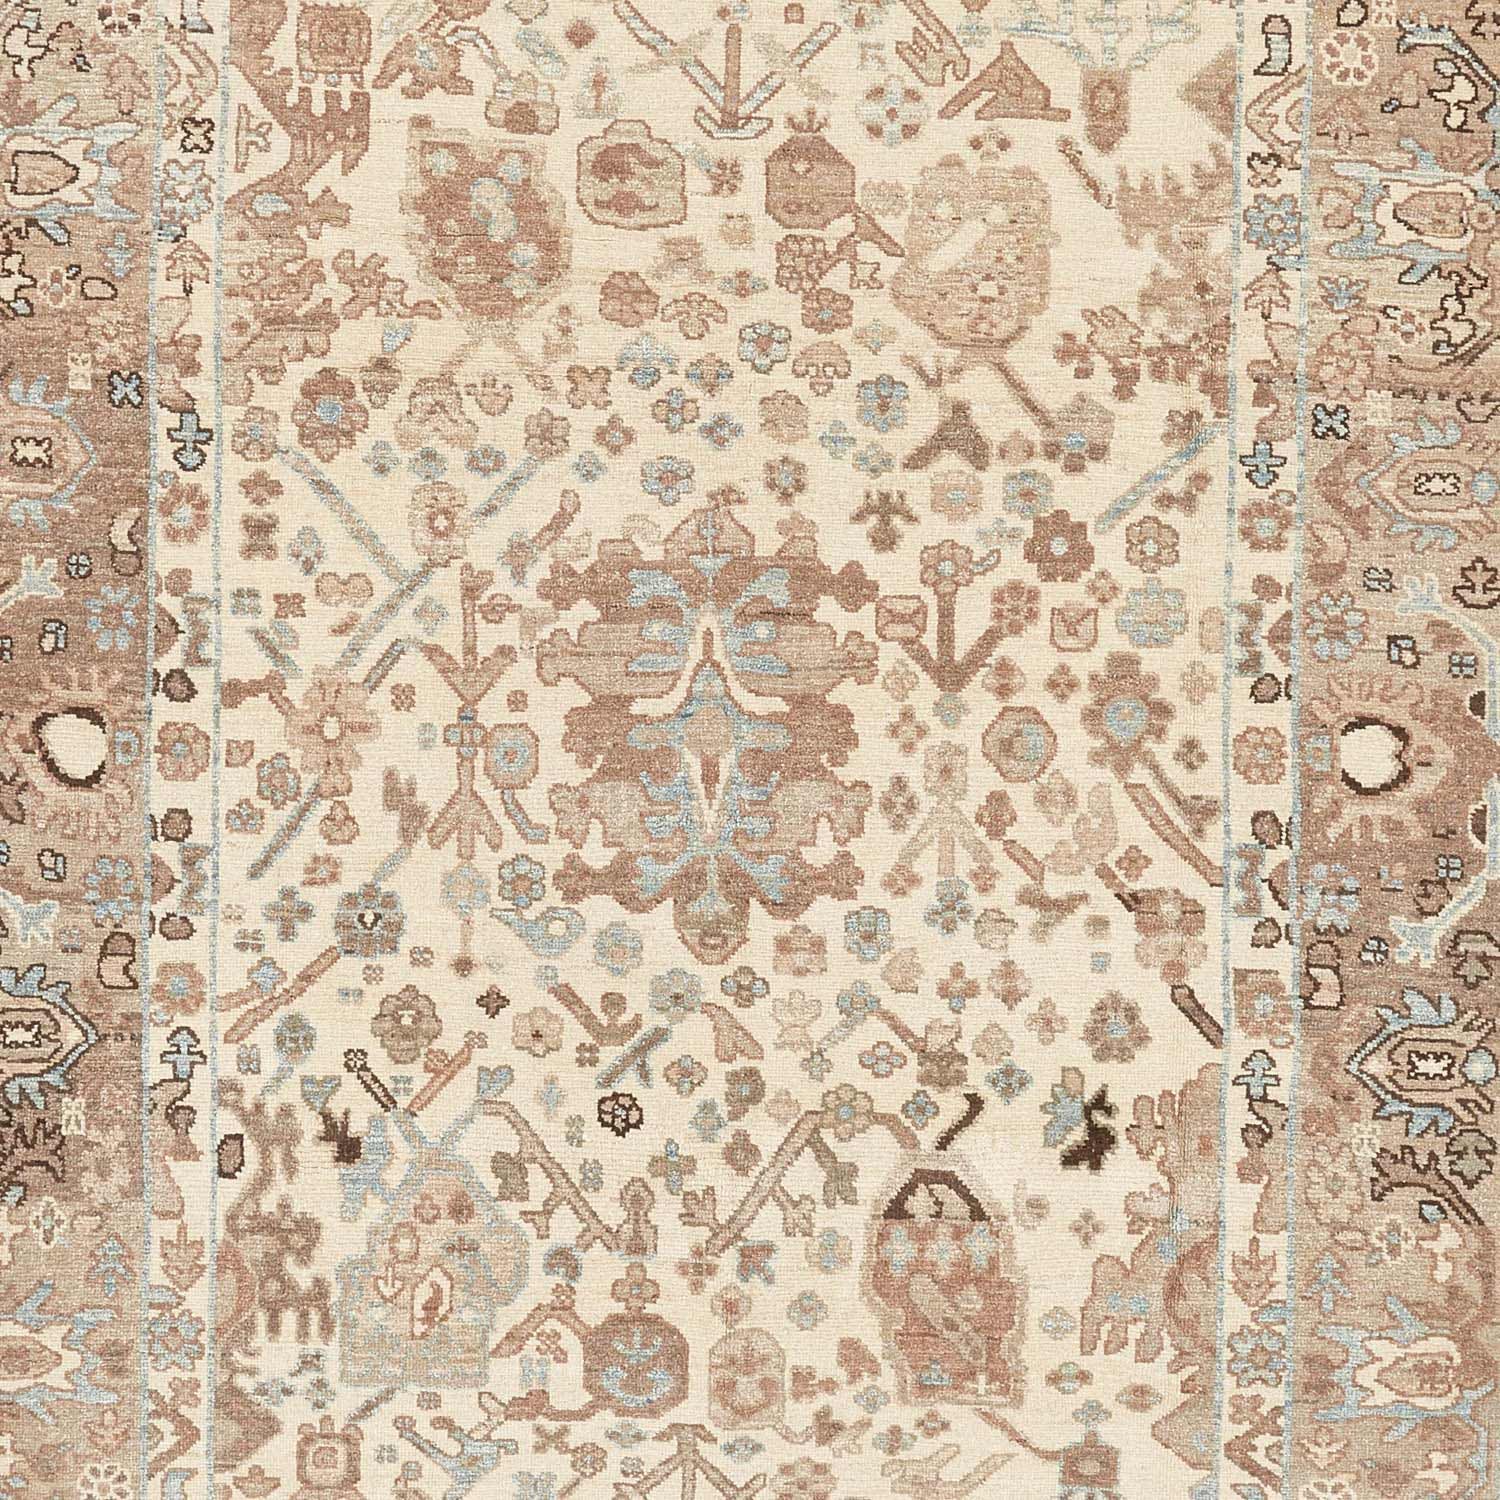 Vintage Persian-style rug featuring intricate floral and geometric motifs.